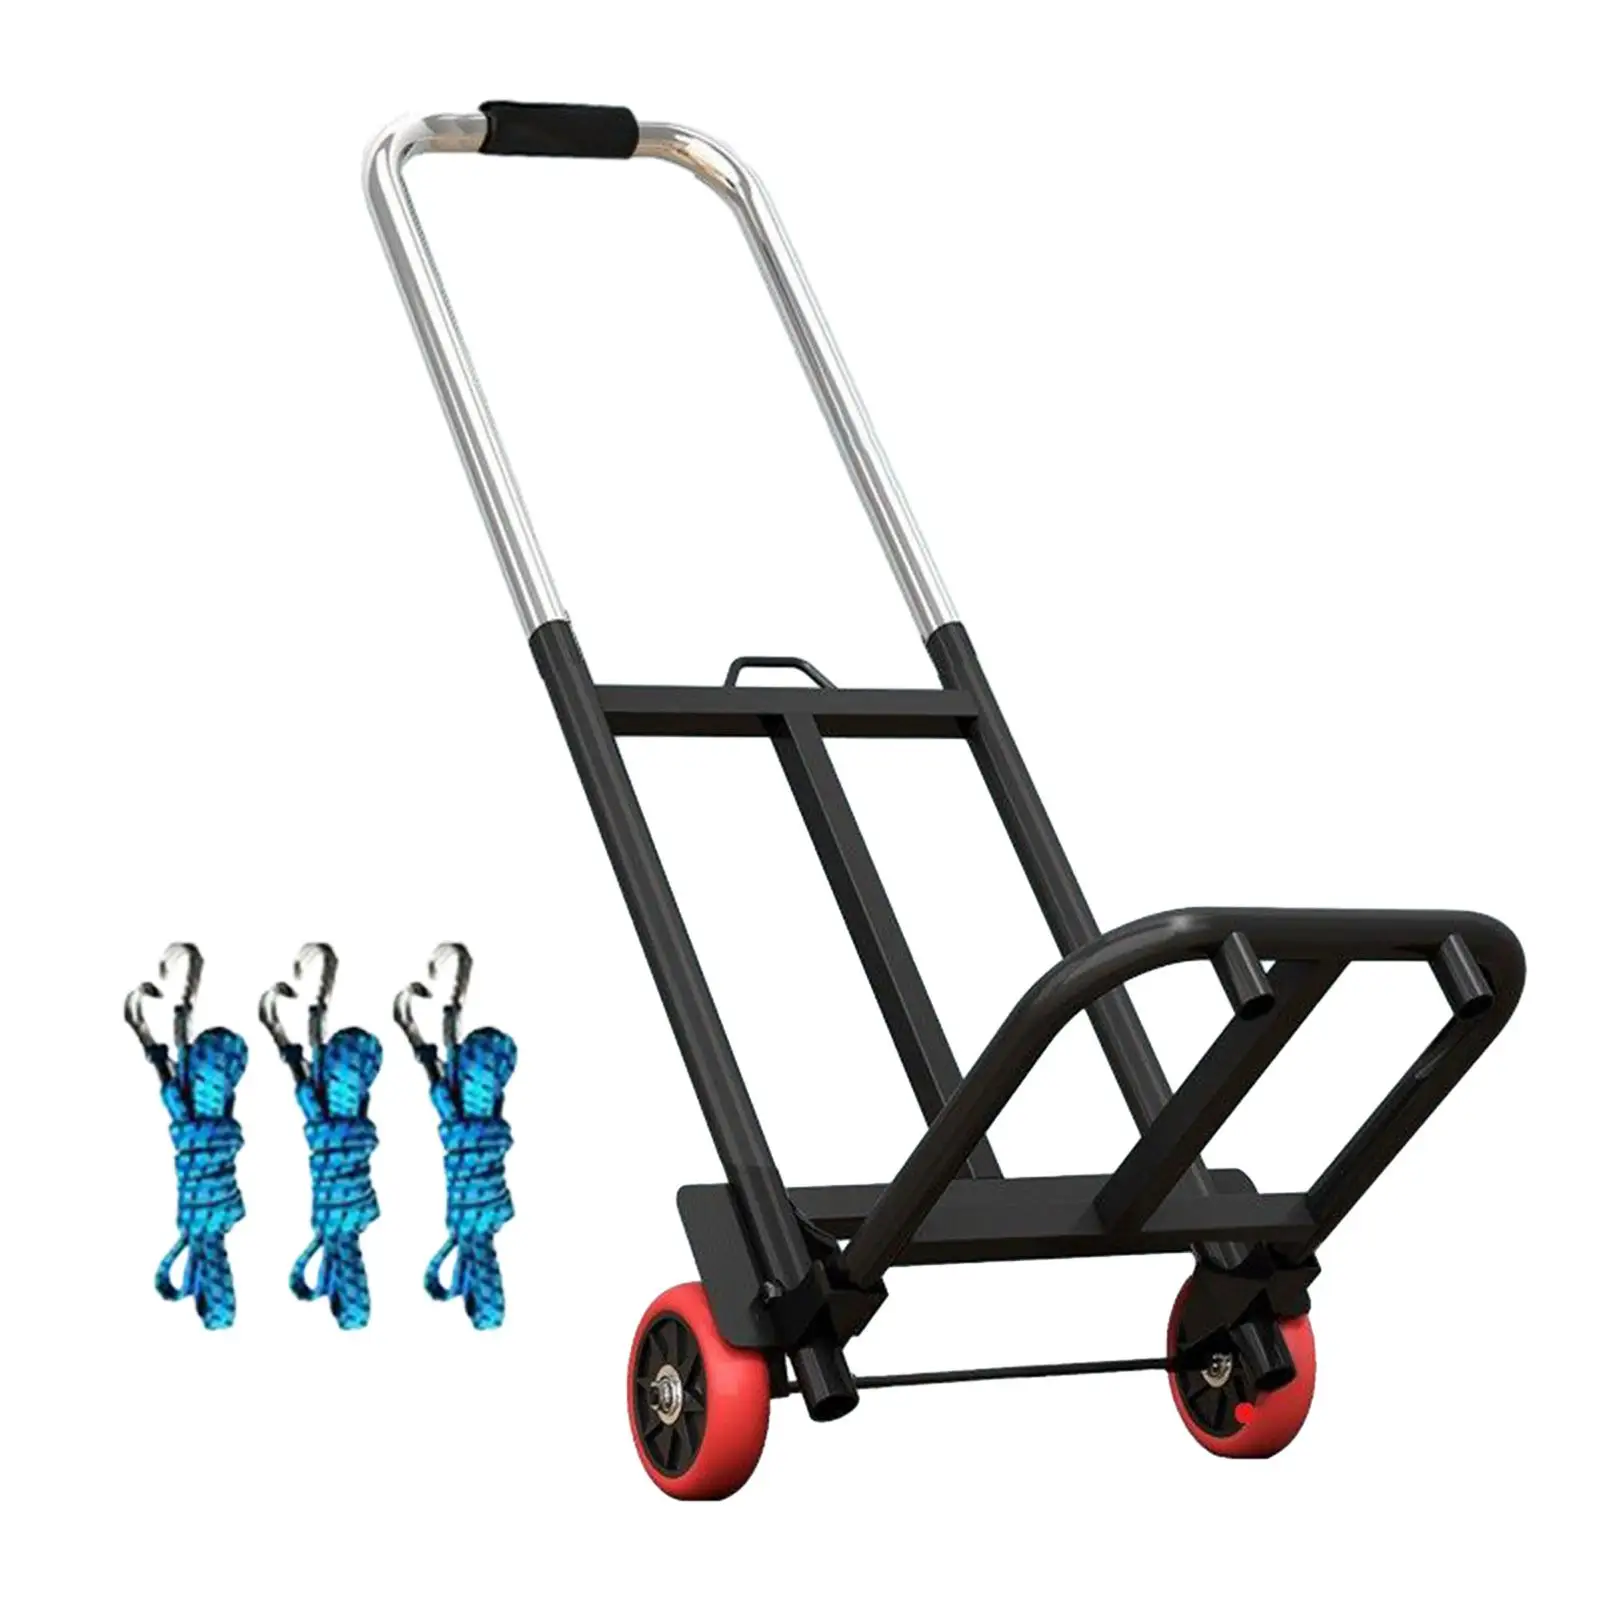 Folding Hand Truck Luggage Trolley Cart Durable Easily Transport and Storage Shopping Cart with 2 Wheels for Home Moving